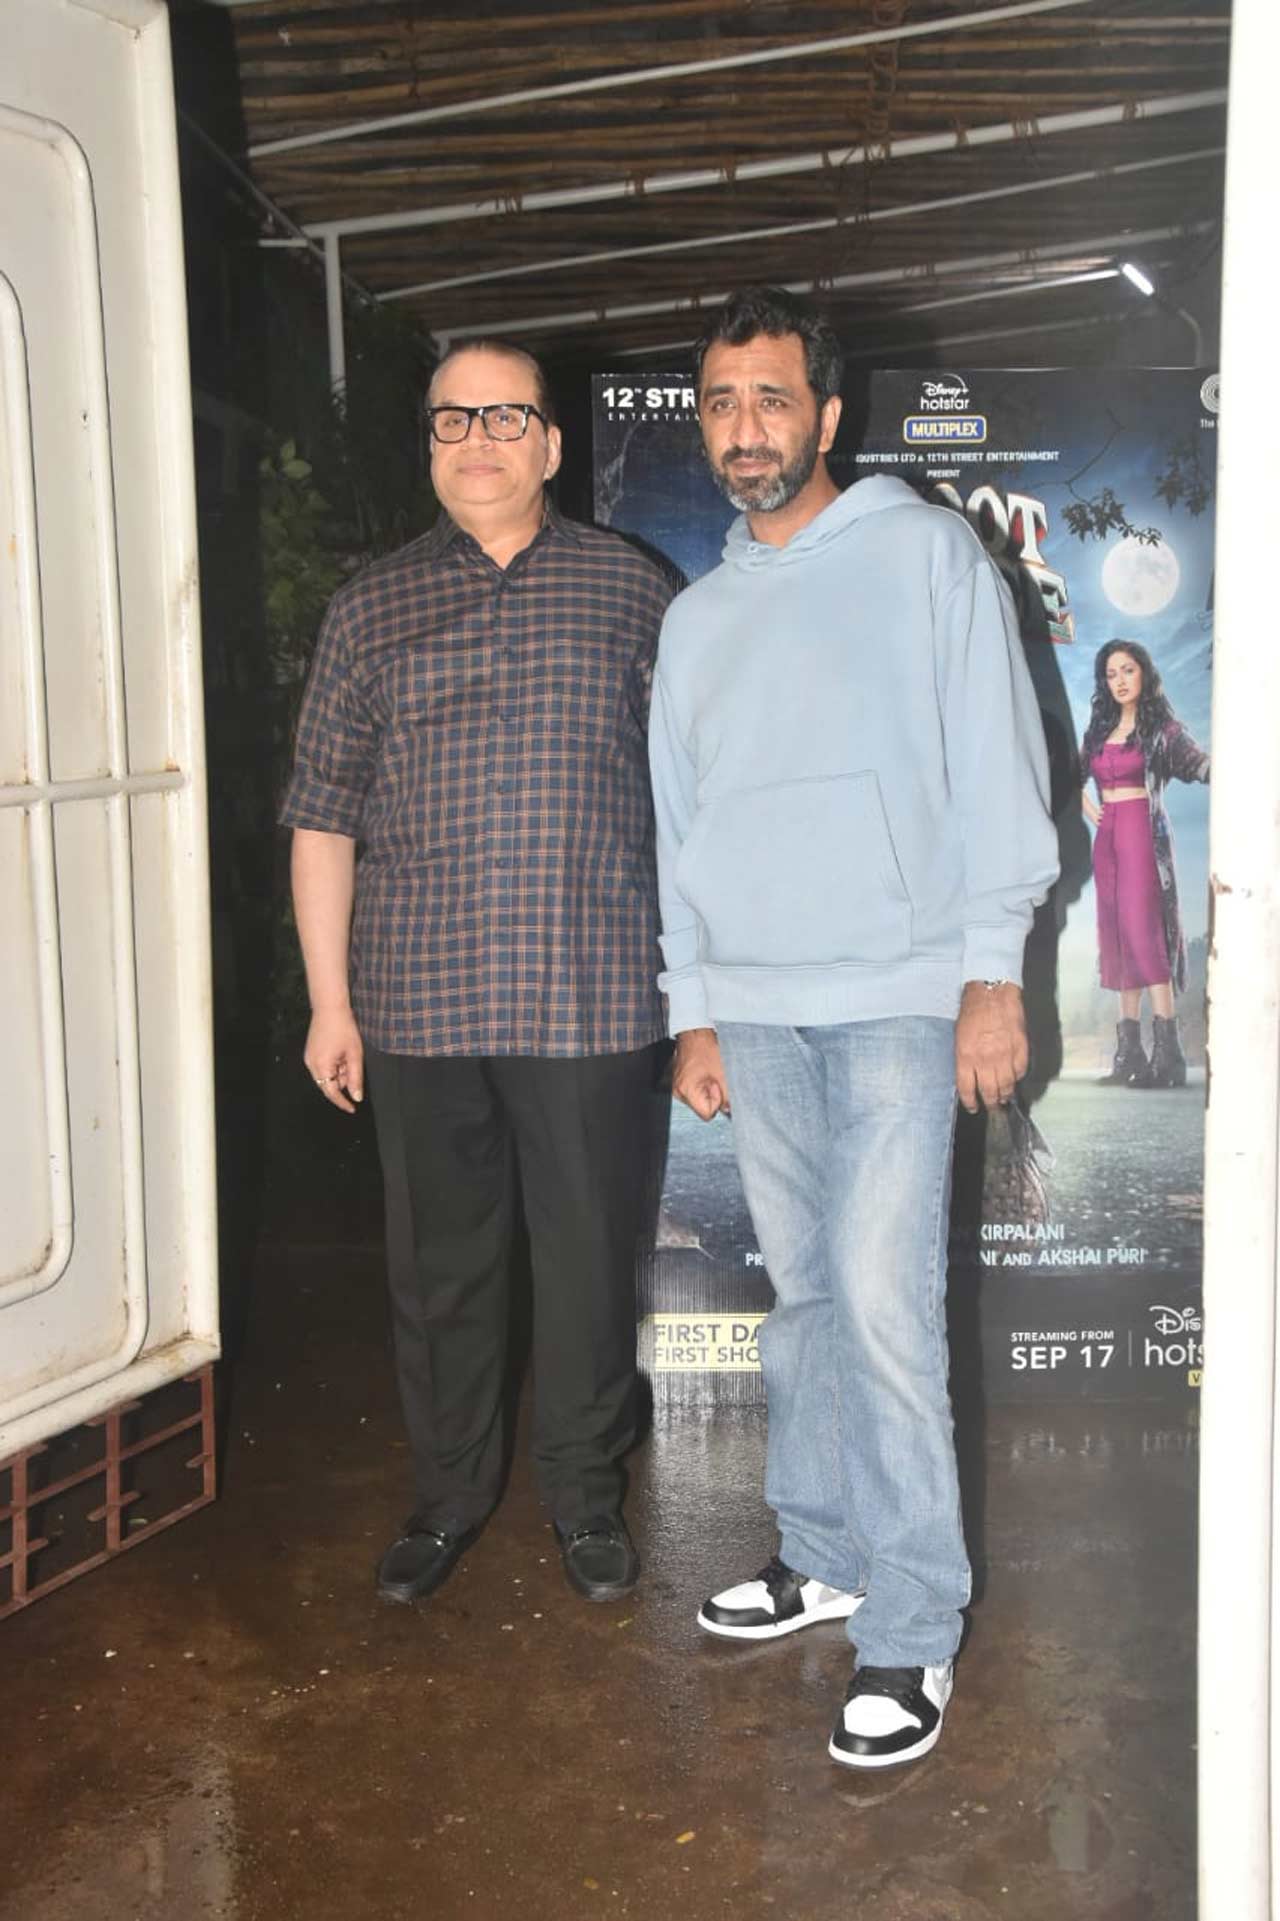 Arjun Kapoor, Saif Ali Khan were missing from the special show. It seems like the duo decided to skip the movie outing. Speaking of Saif, the actor confessed that he was not very excited about an OTT release because he feels happy with the work he has done in the movie. In picture: Ramesh Taurani with the director Akshai Puri at the screening.